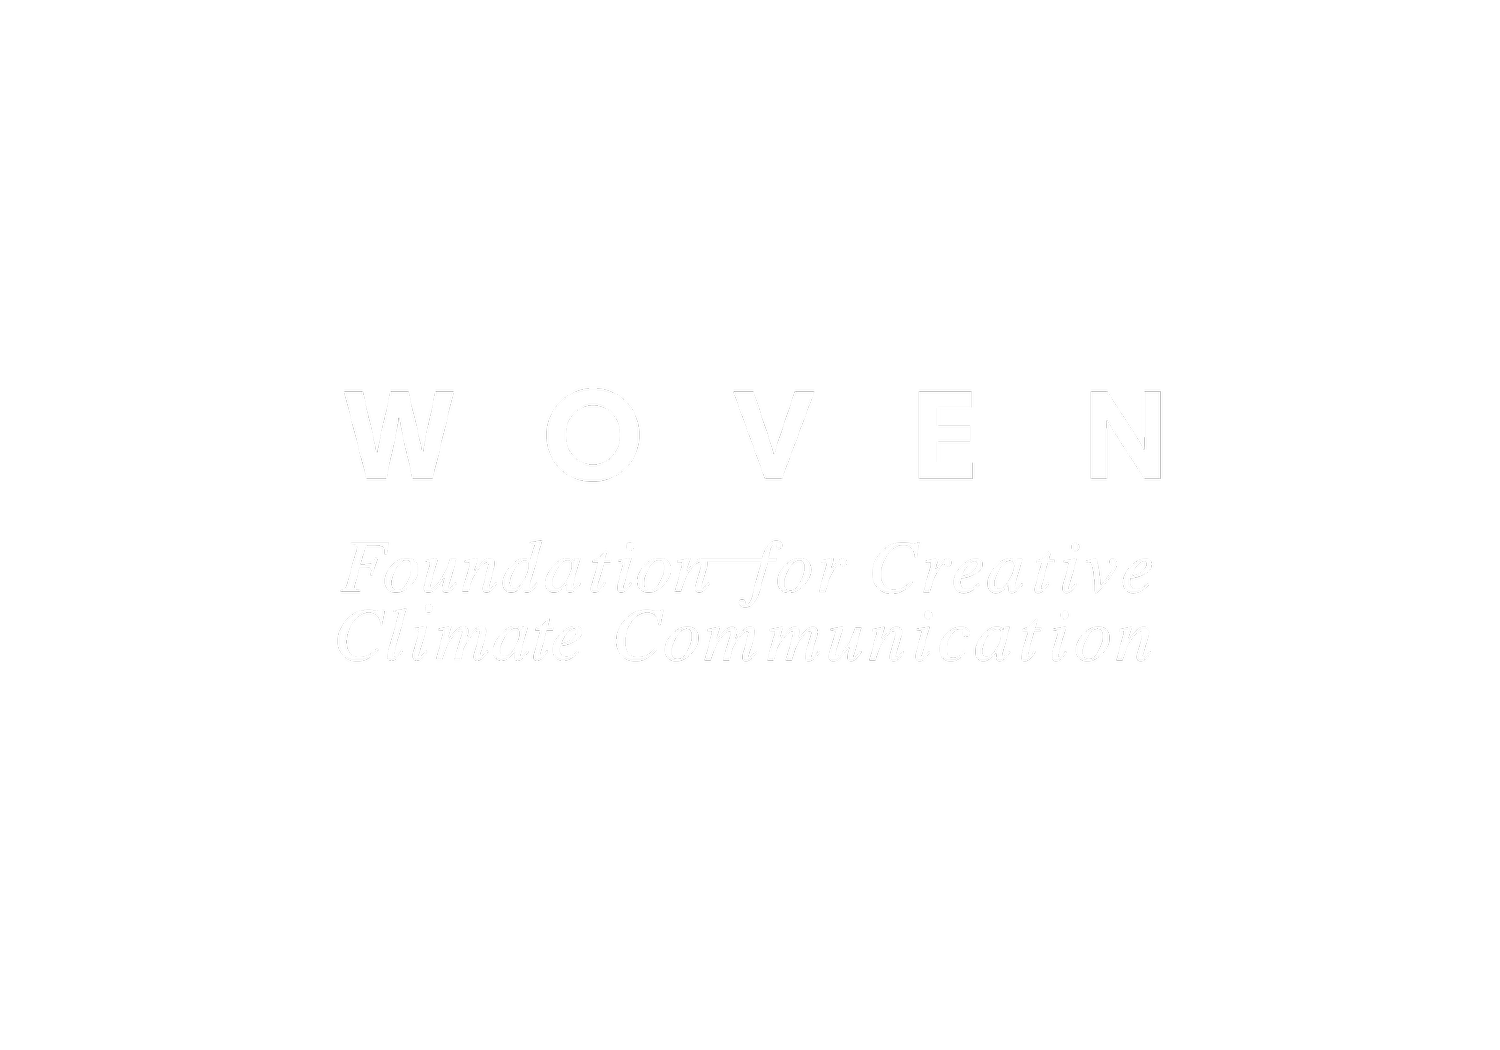  Woven Foundation For creative climate communication